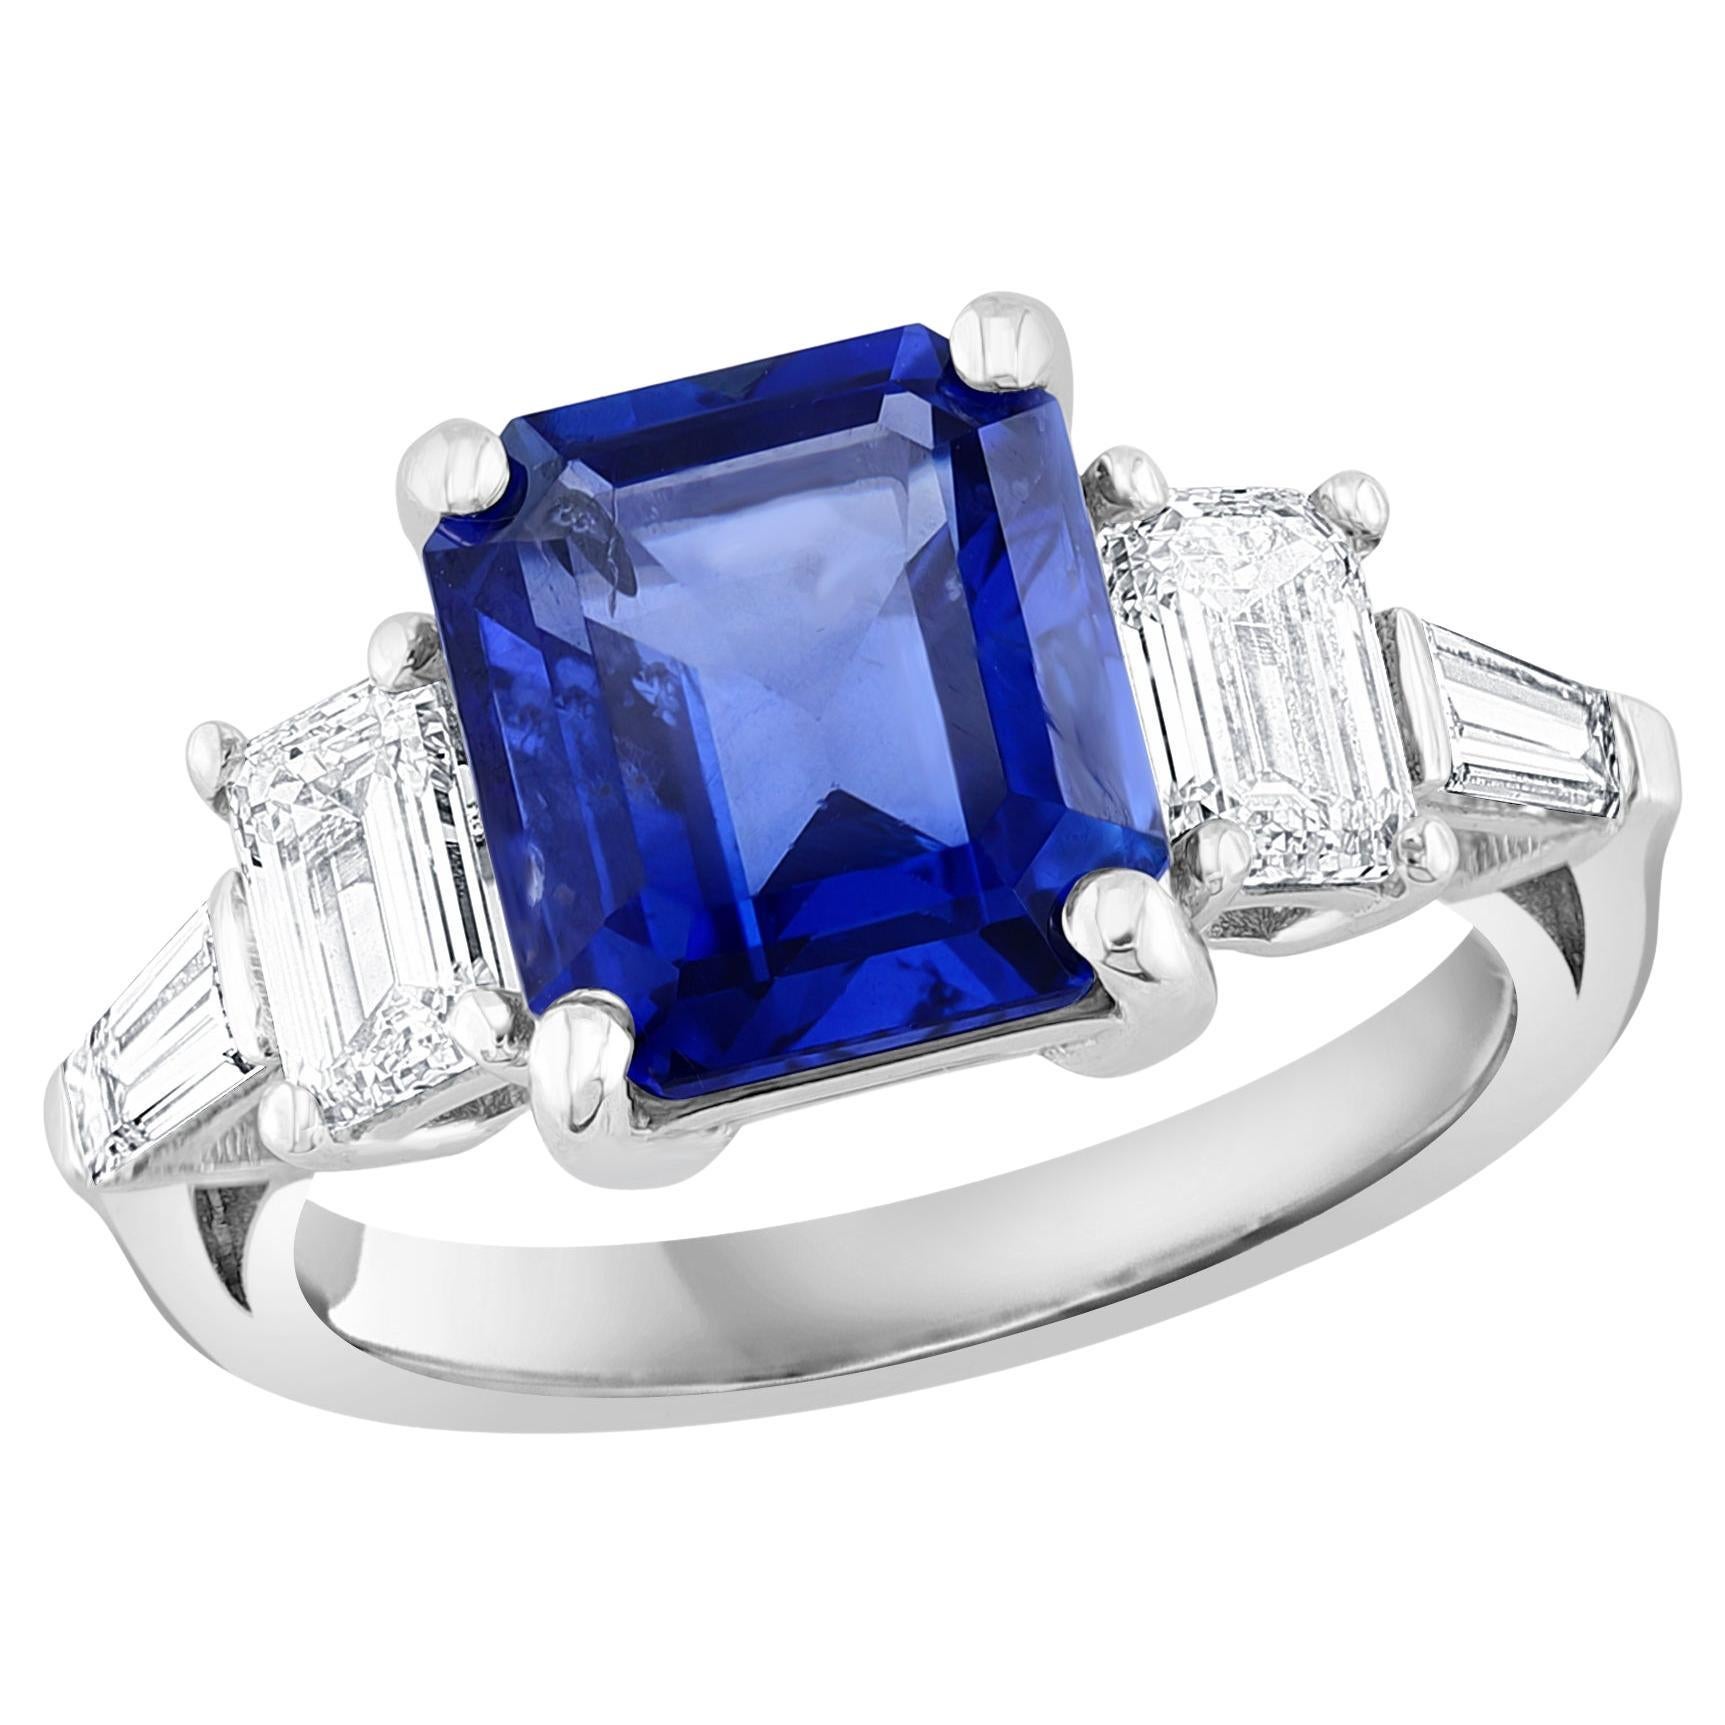 Certified 4.74 Carat Emerald Cut Sapphire and Diamond Five-Stone Engagement Ring